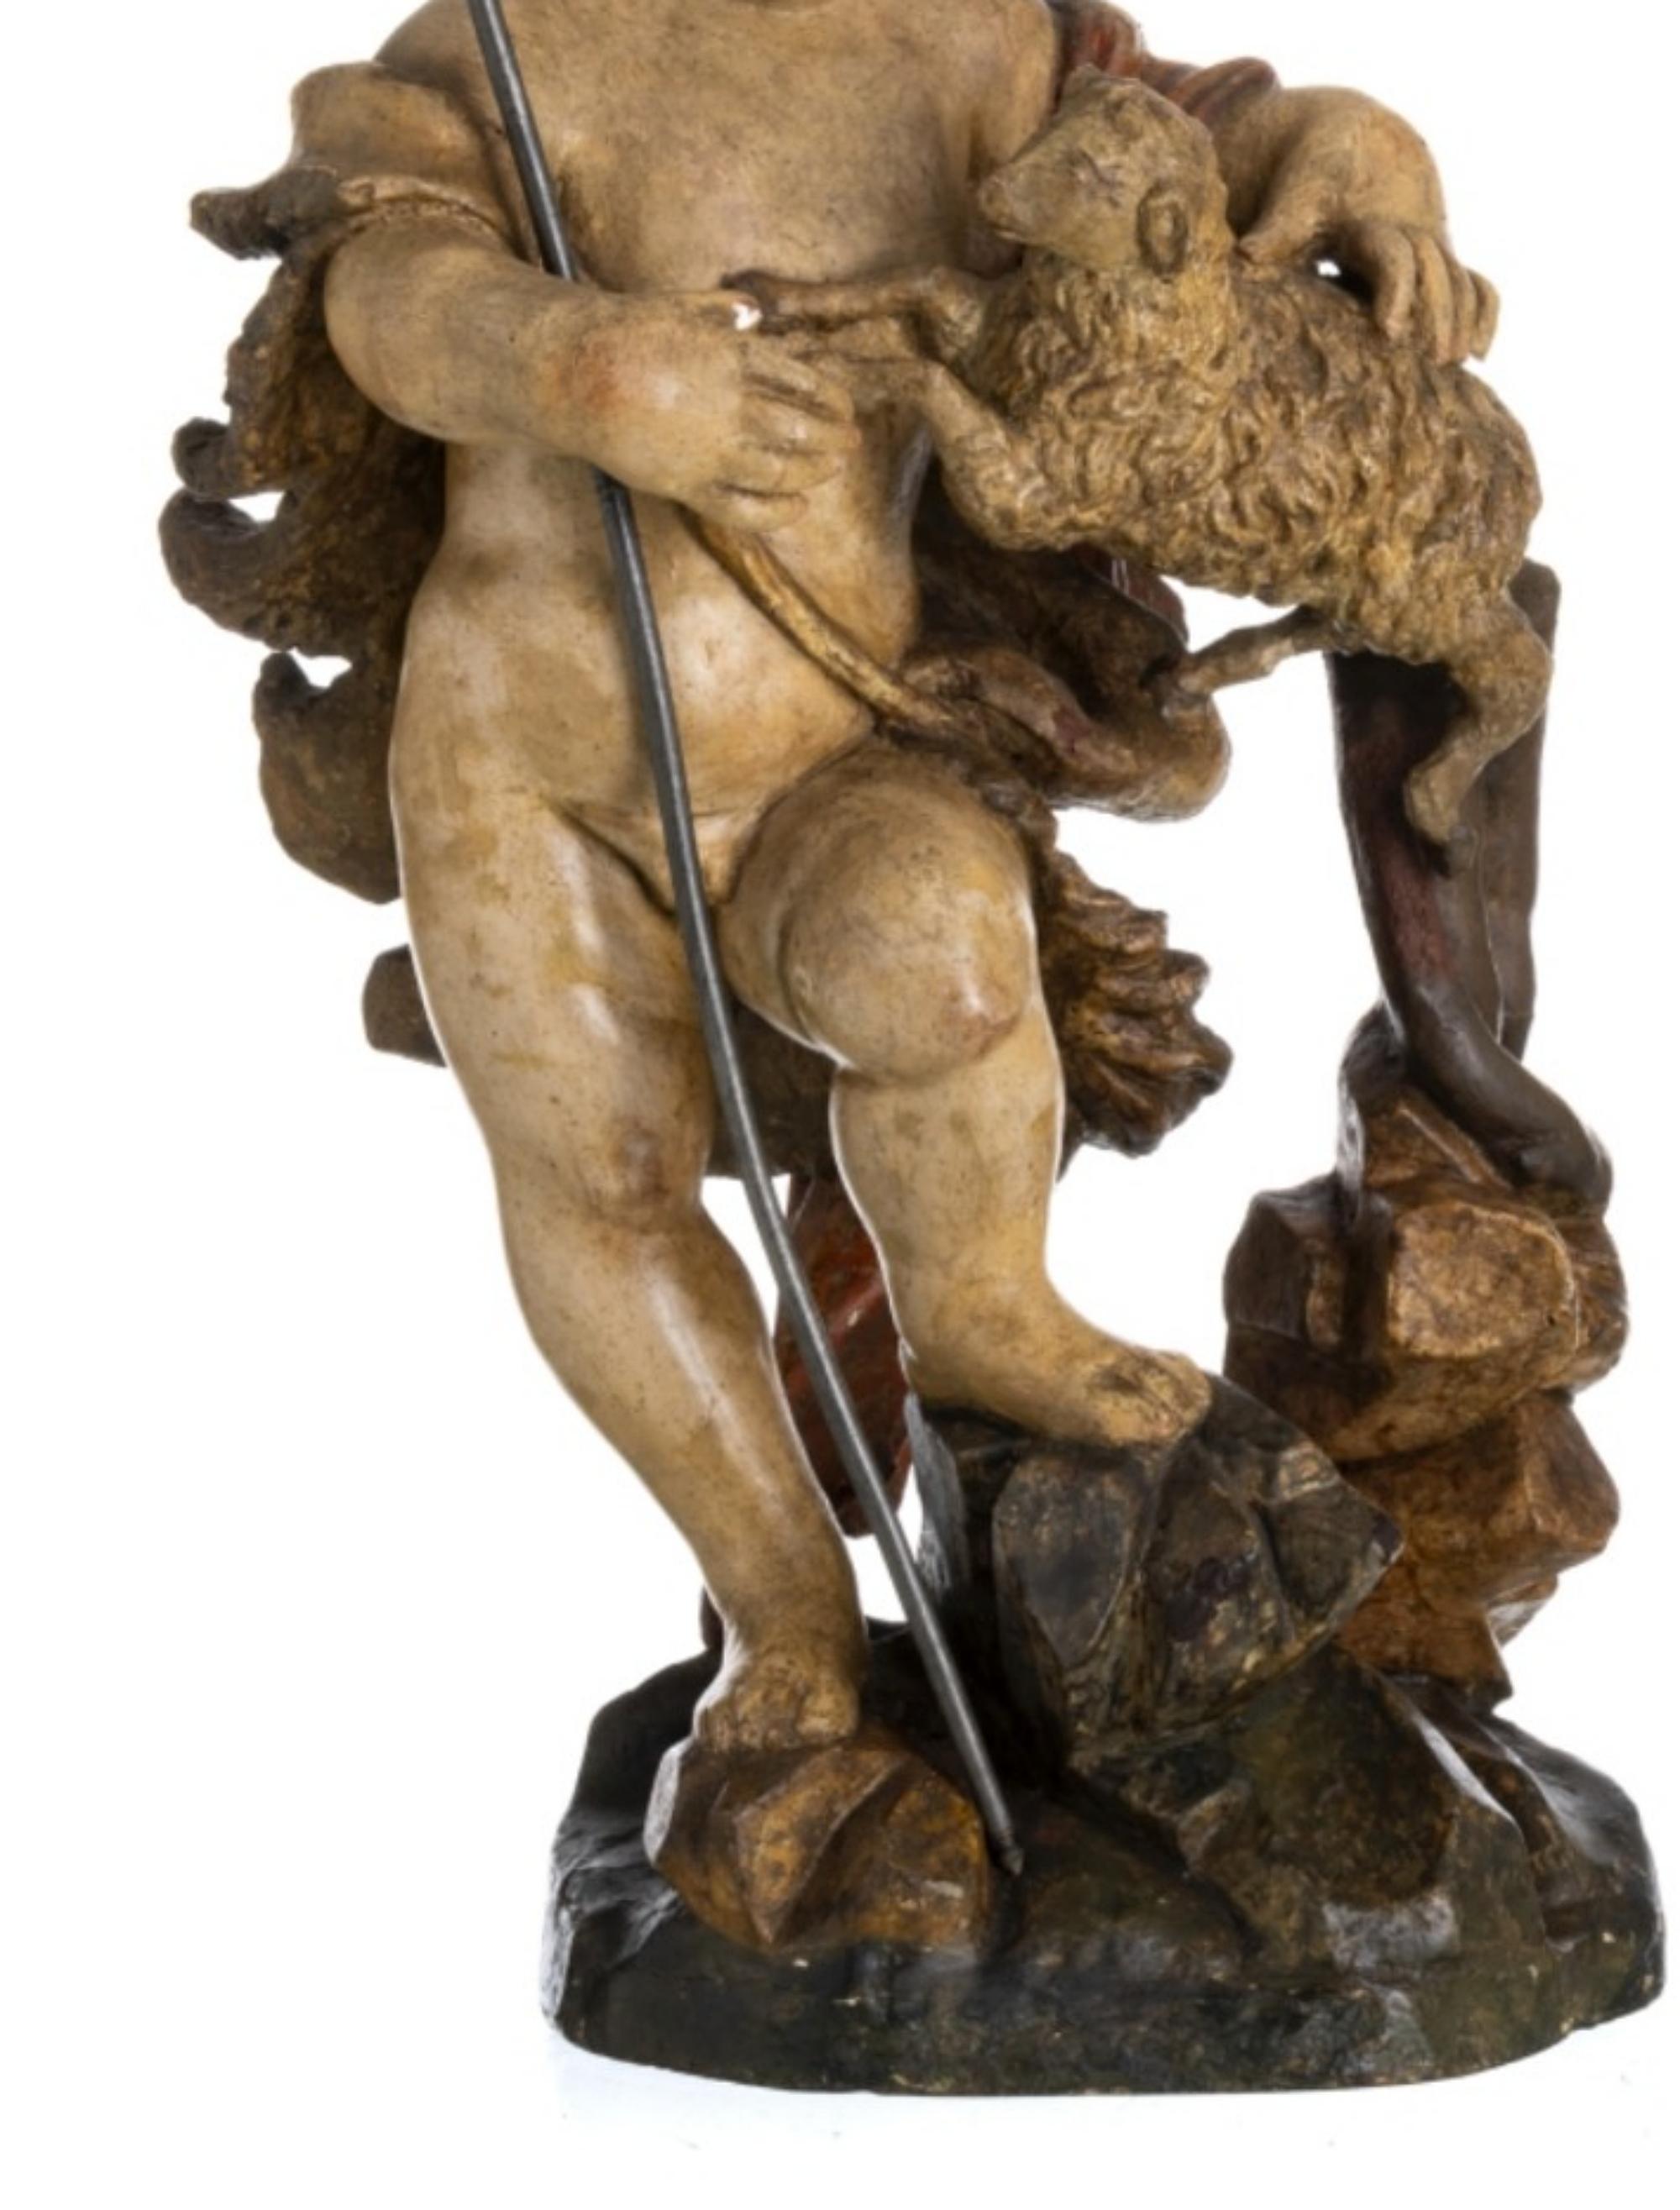 Saint John the Baptist 18th century

Portuguese sculpture from the 18th century. 
in polychrome wood. 
The figure is represented standing with the lamb. 
Small flaws.
Measure: height: 58 cm
Good condition.